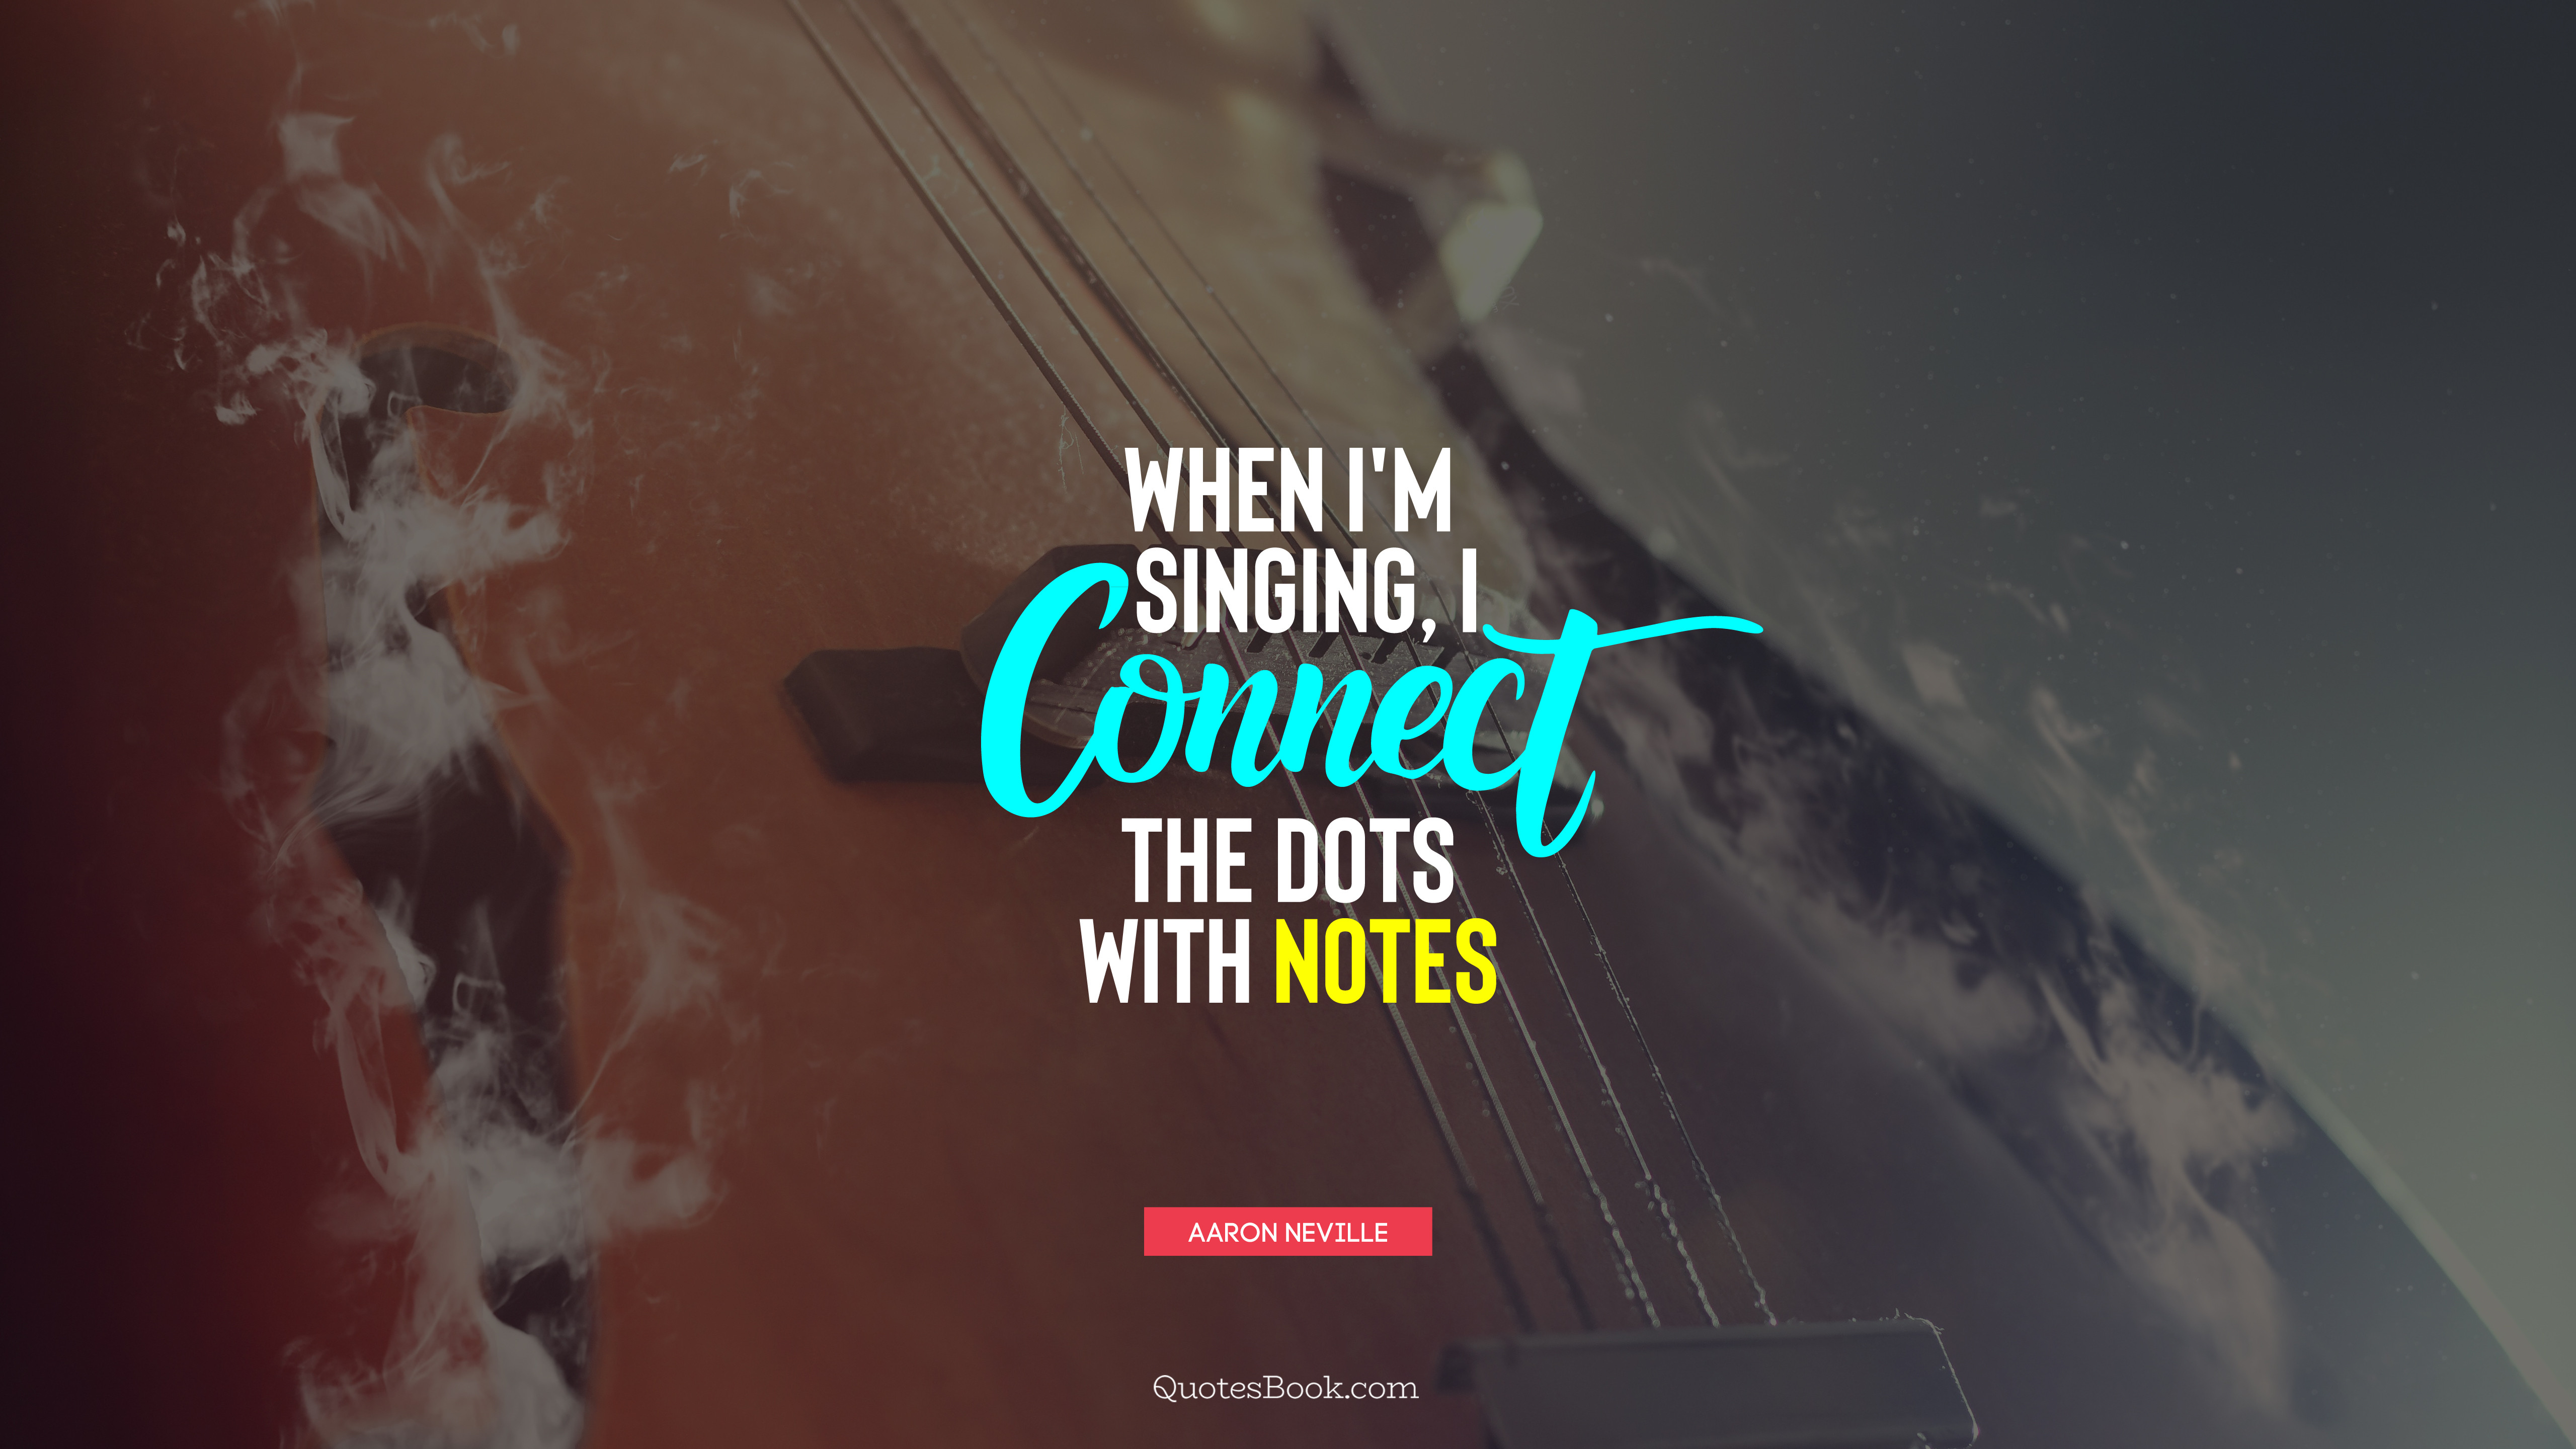 When I M Singing I Connect The Dots With Notes Quote By ron Neville Quotesbook